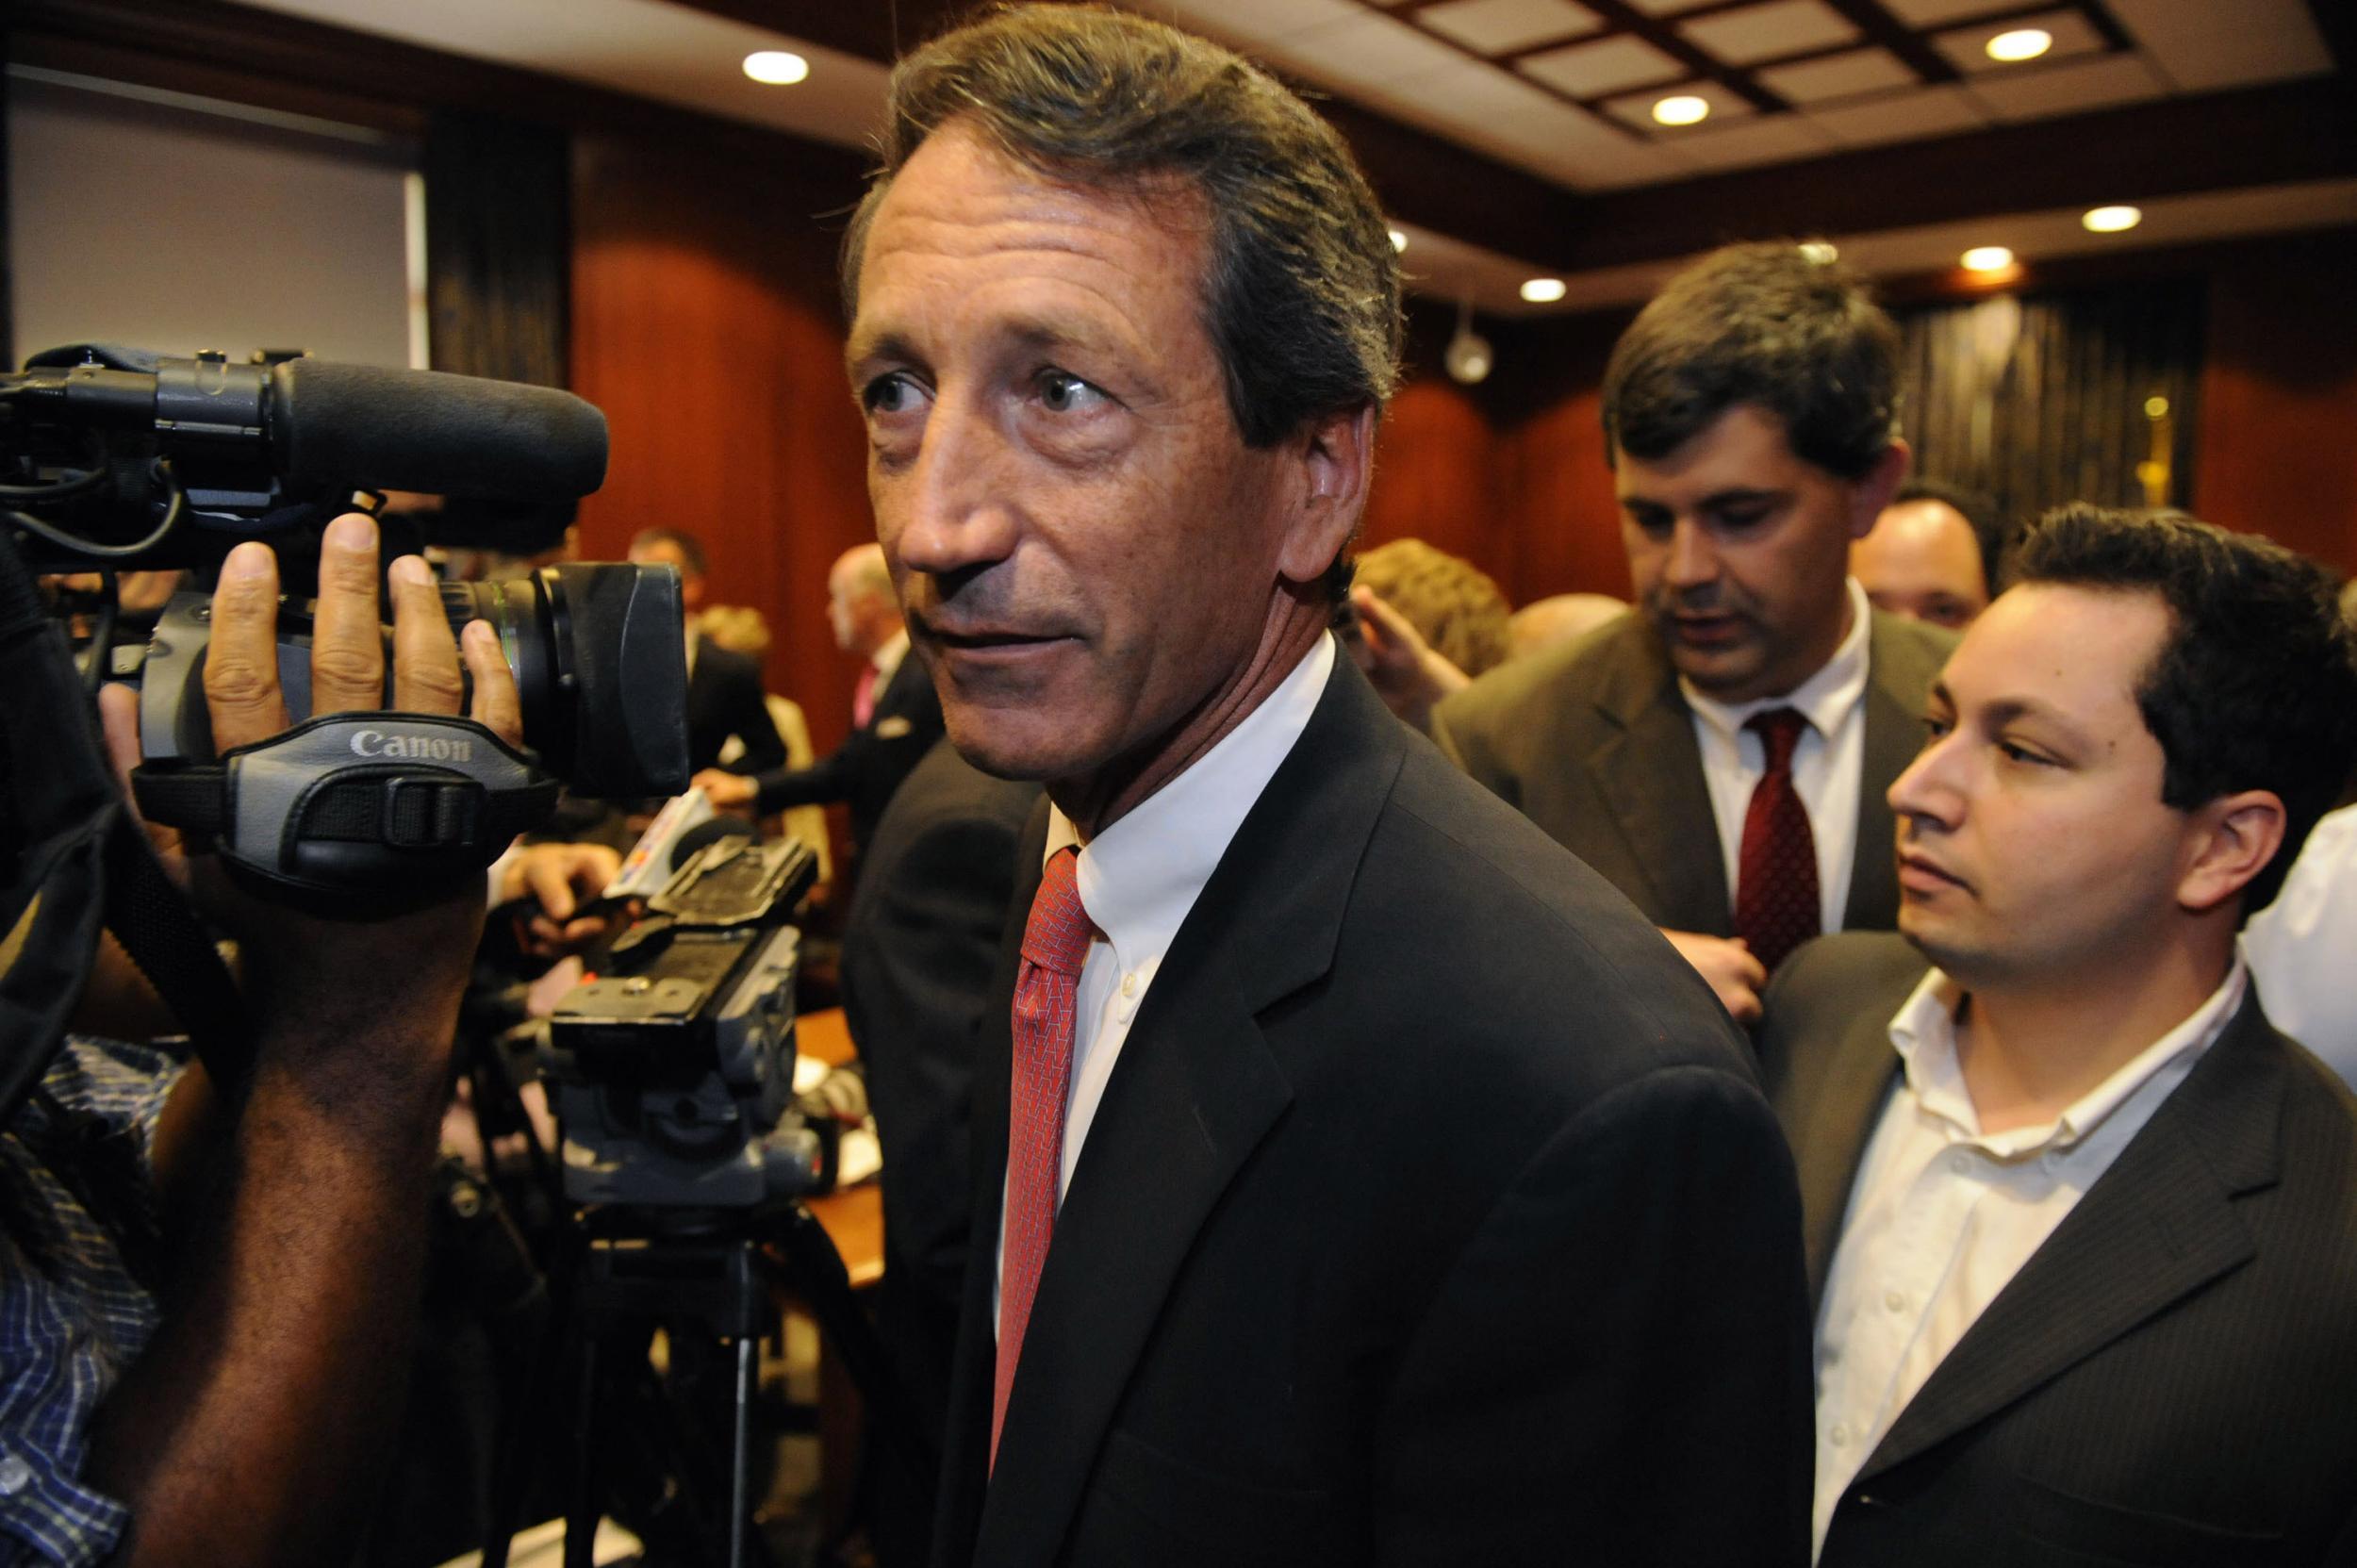 Representative Mark Sanford says he did not read all of the American Health Care Act before voting for it